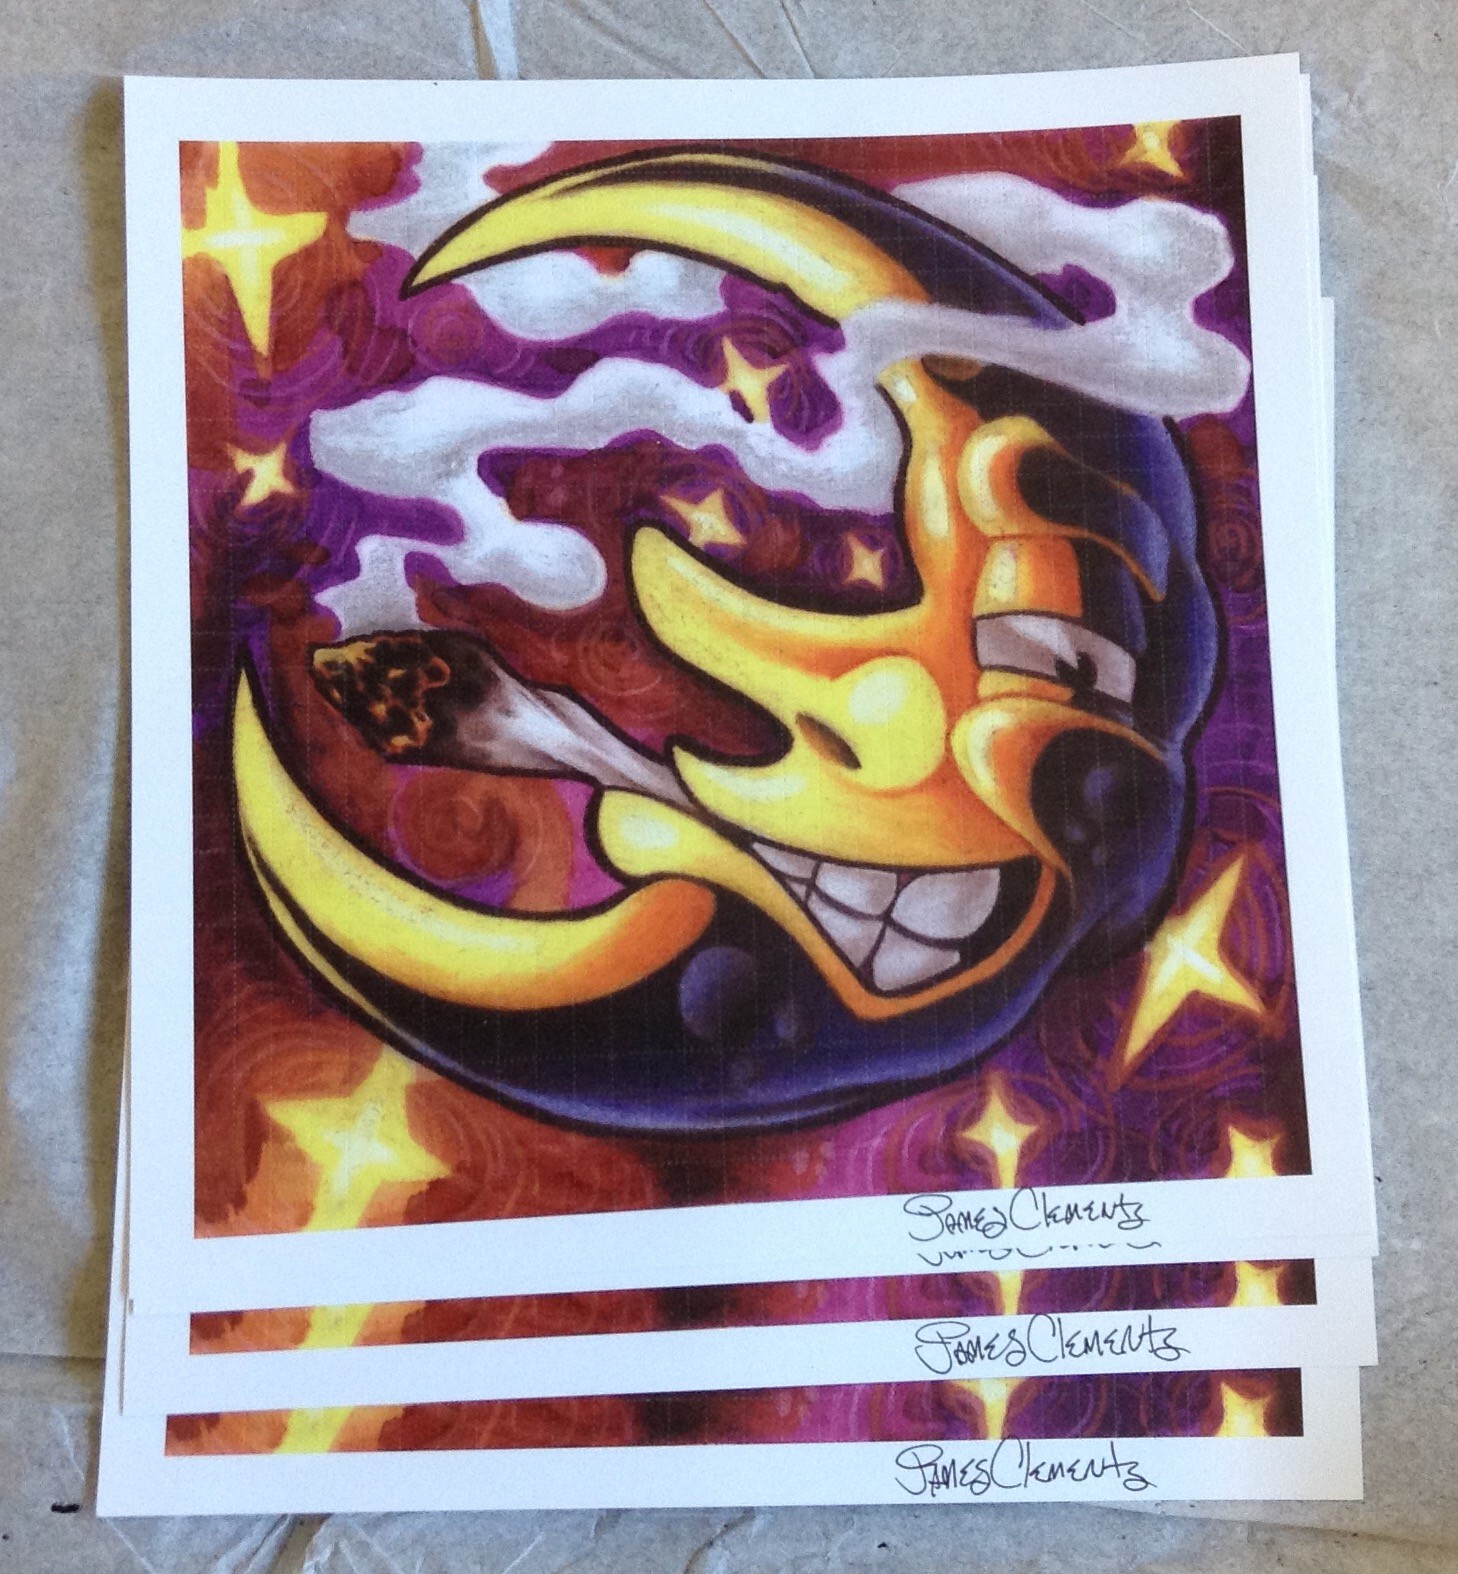 BANANA MOON (SIGNED BY JAMES CLEMENTS) - BLOTTER ART